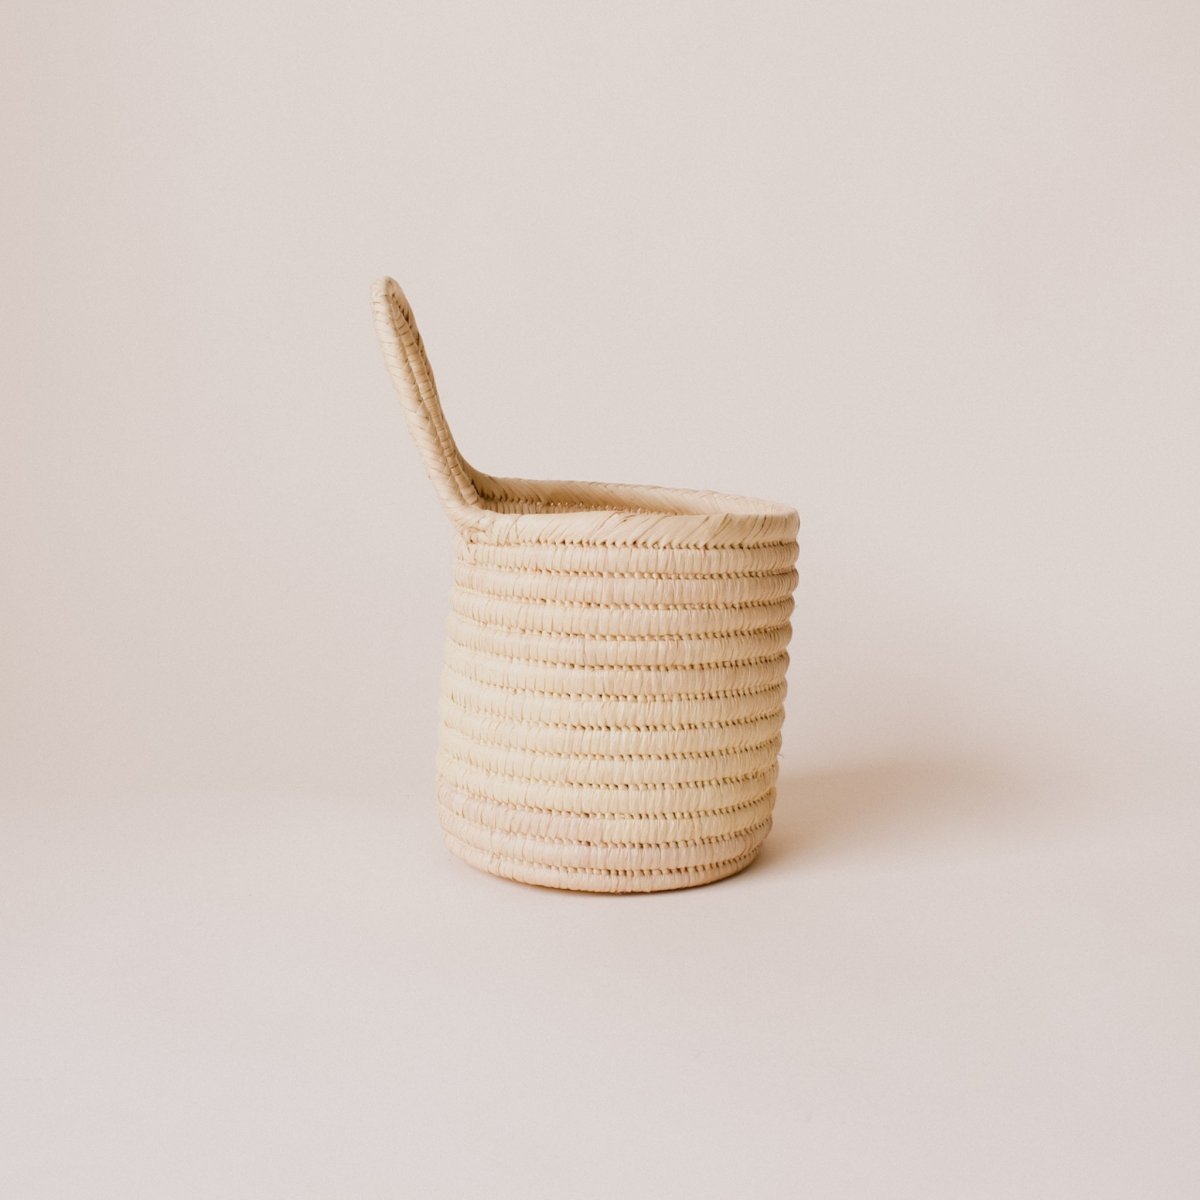 Imani Collective Woven Reed Basket - lily & onyx